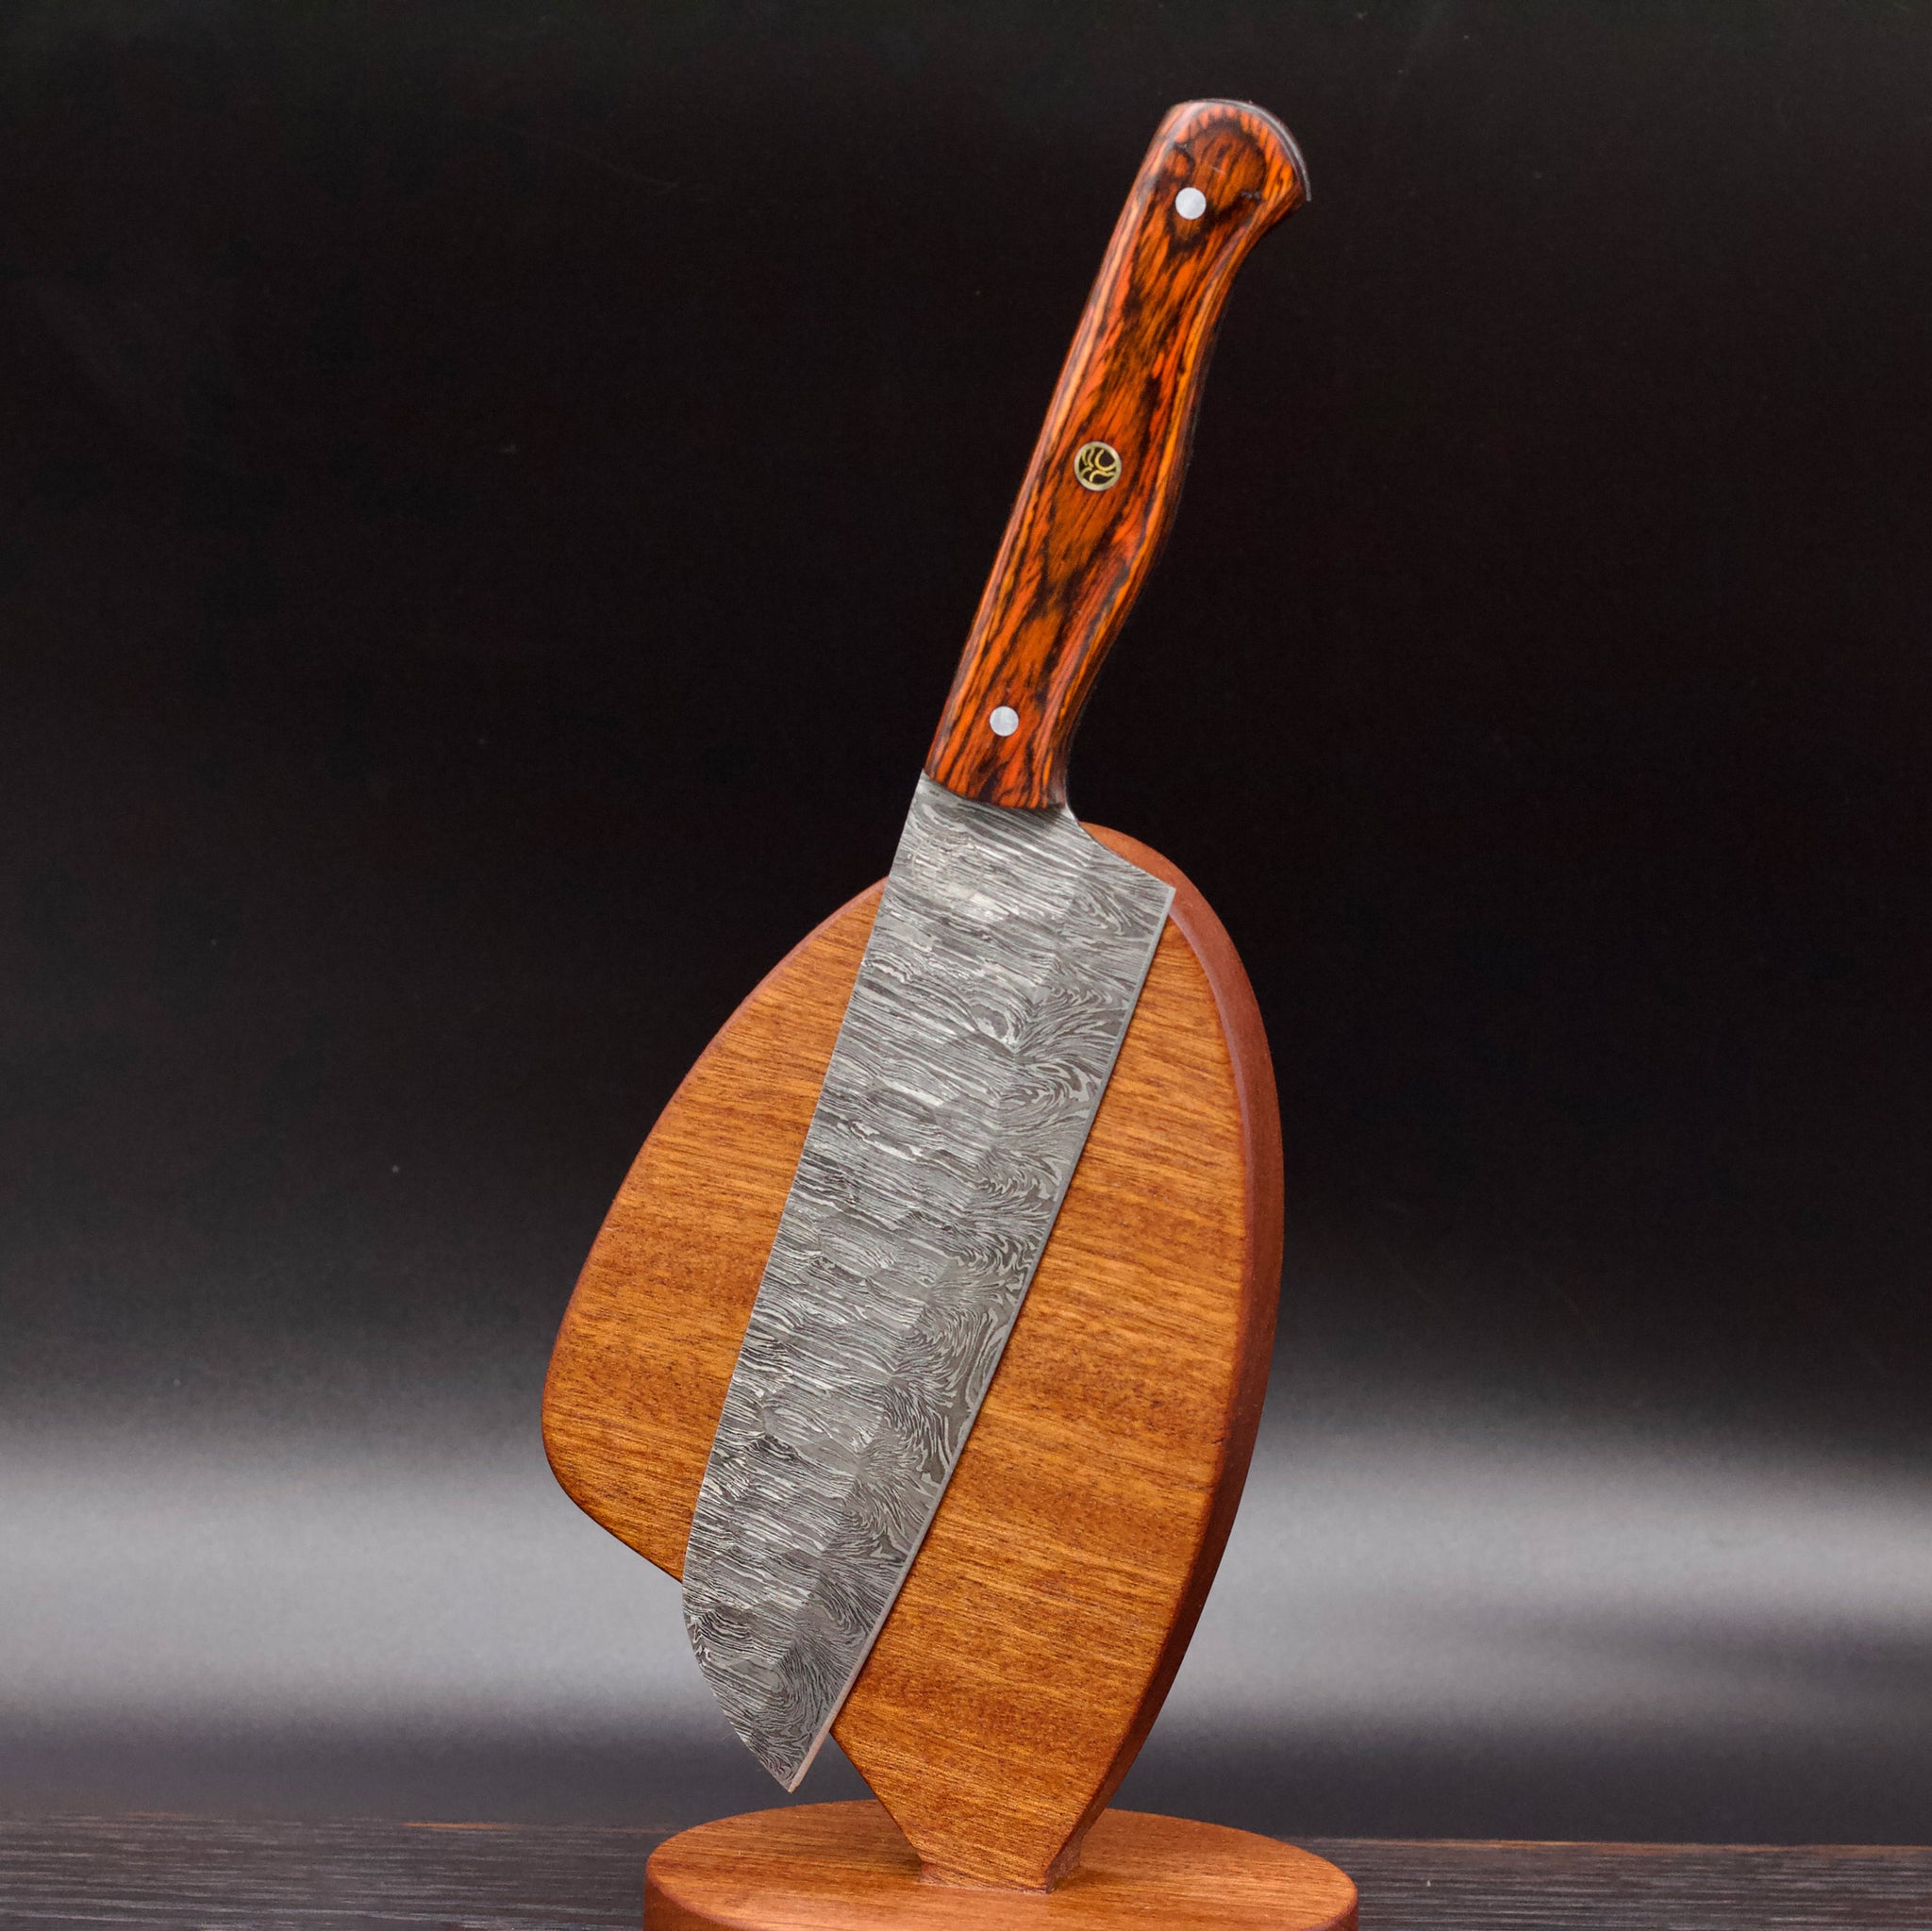 Hand Forged Damascus Chef Knife Colored wood engraved